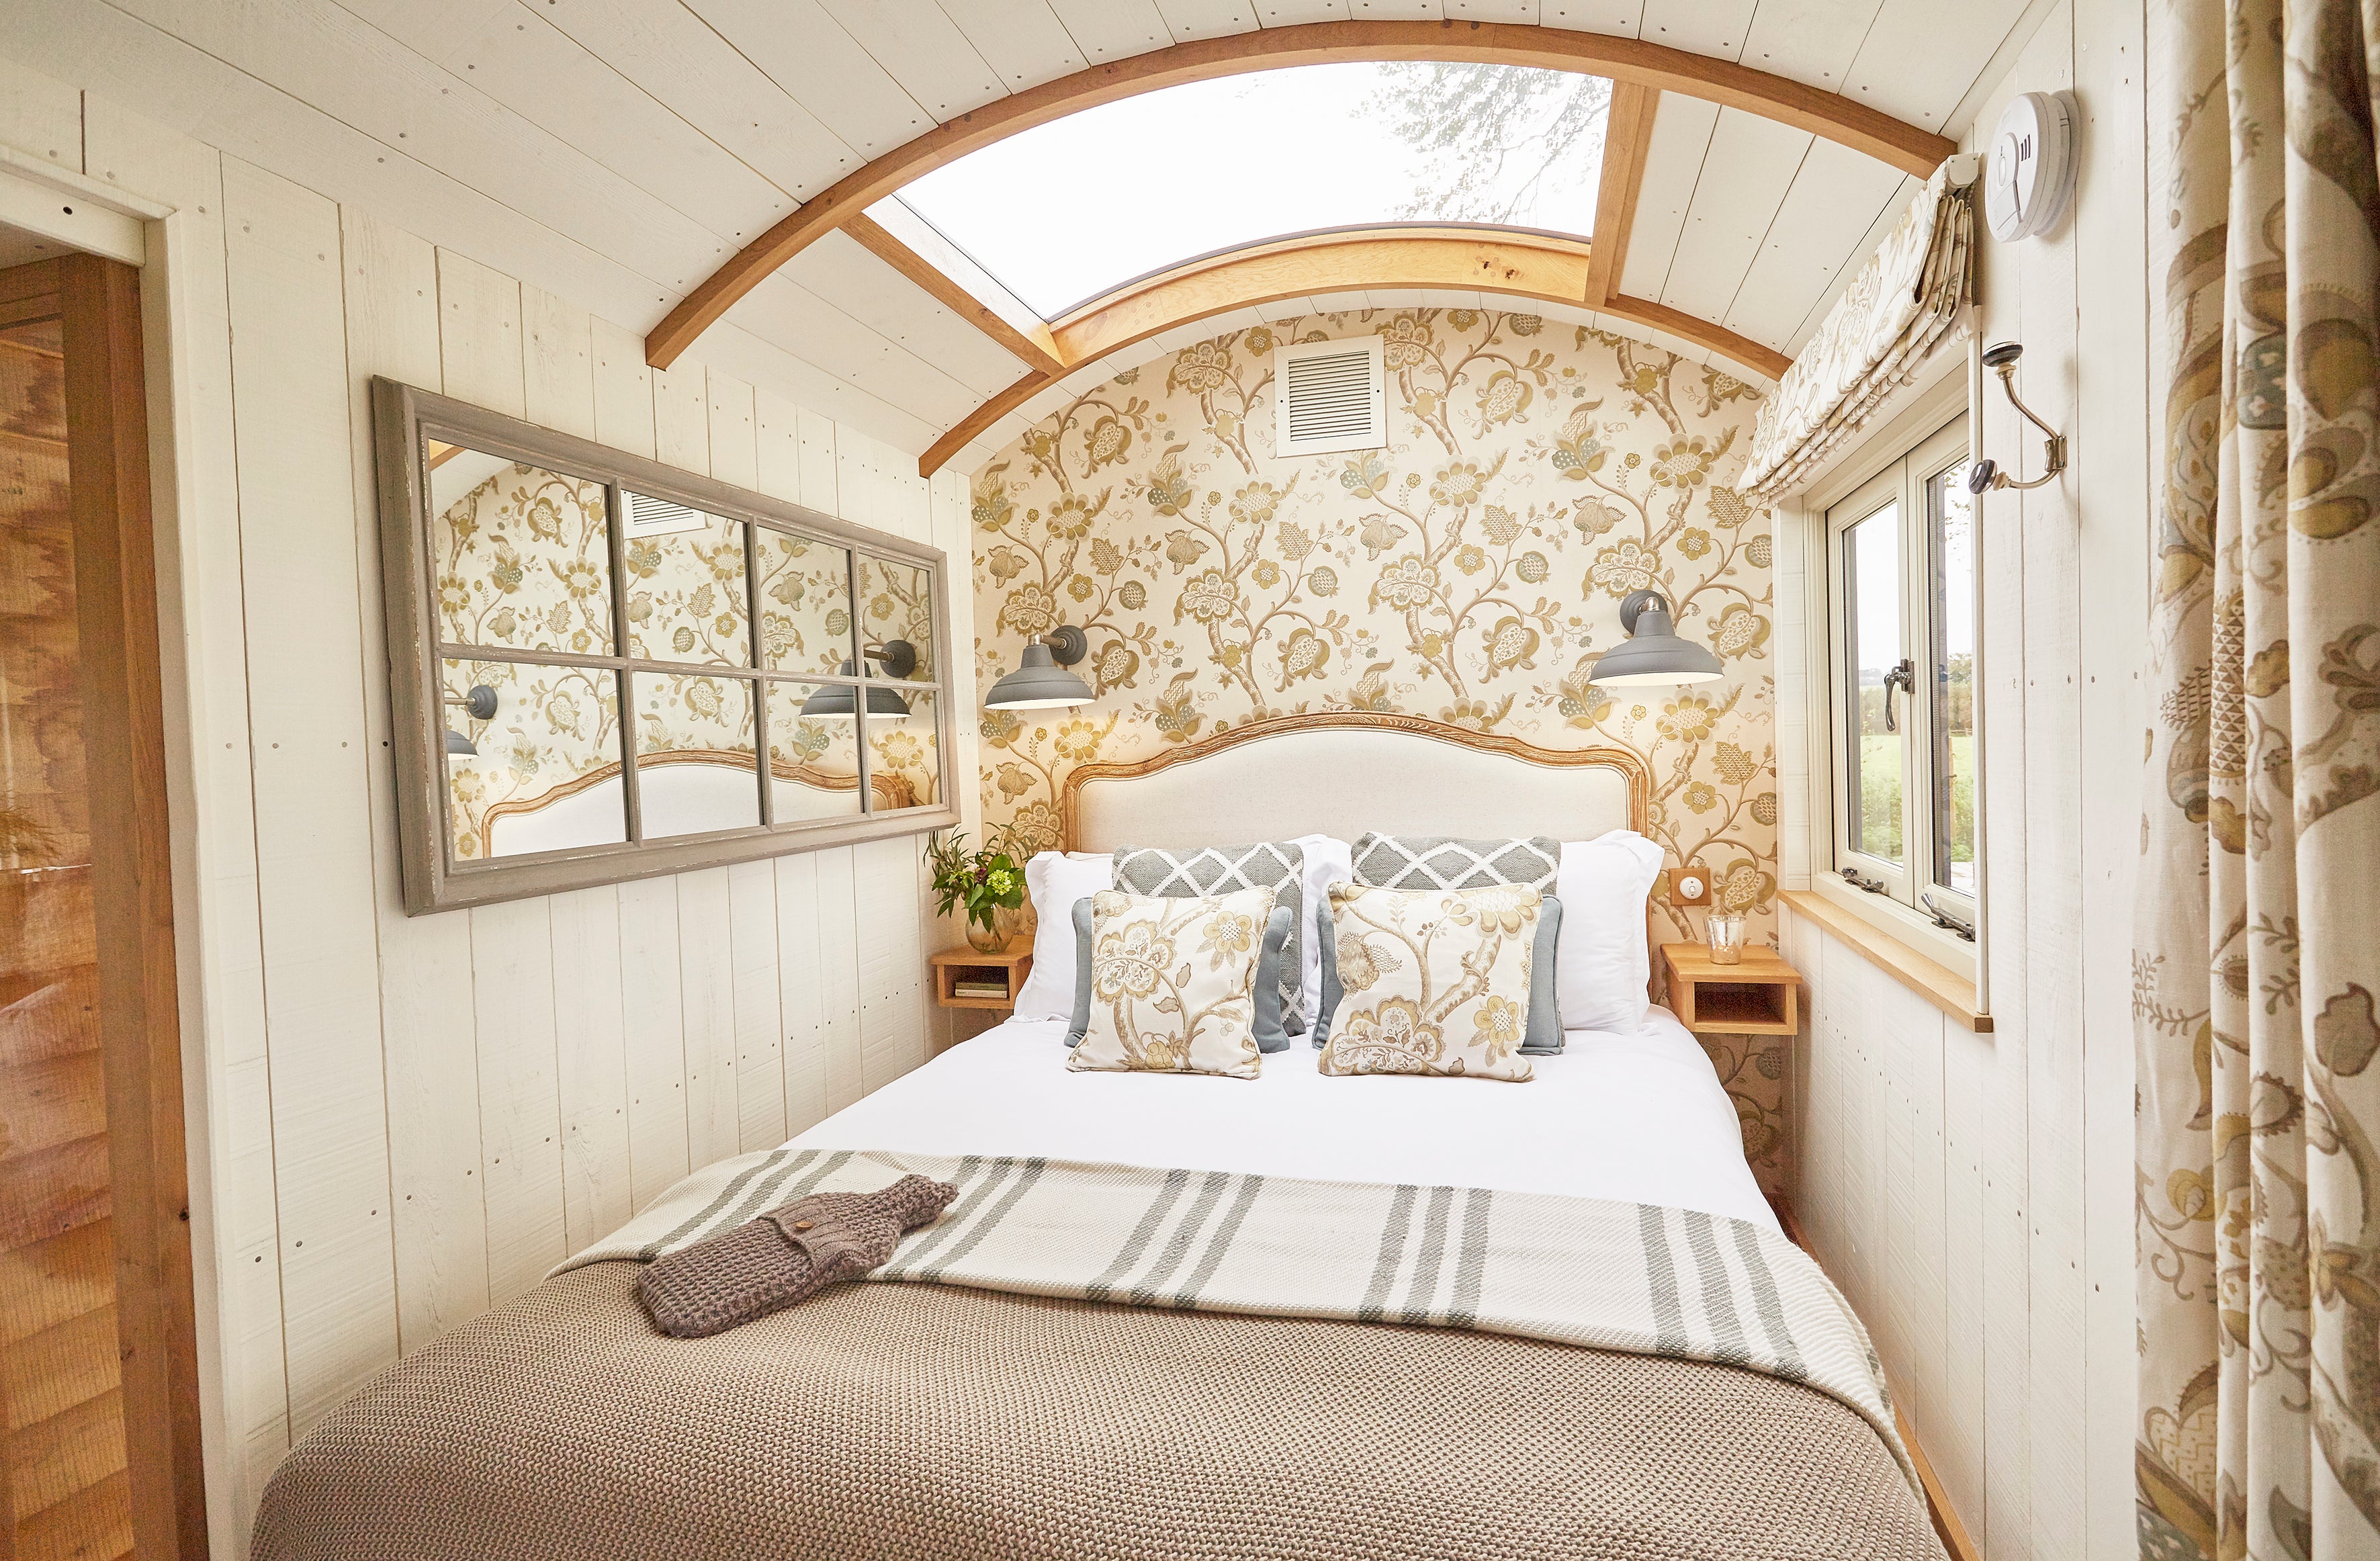 Stargaze to your heart’s content through the glass roof of this homey hut